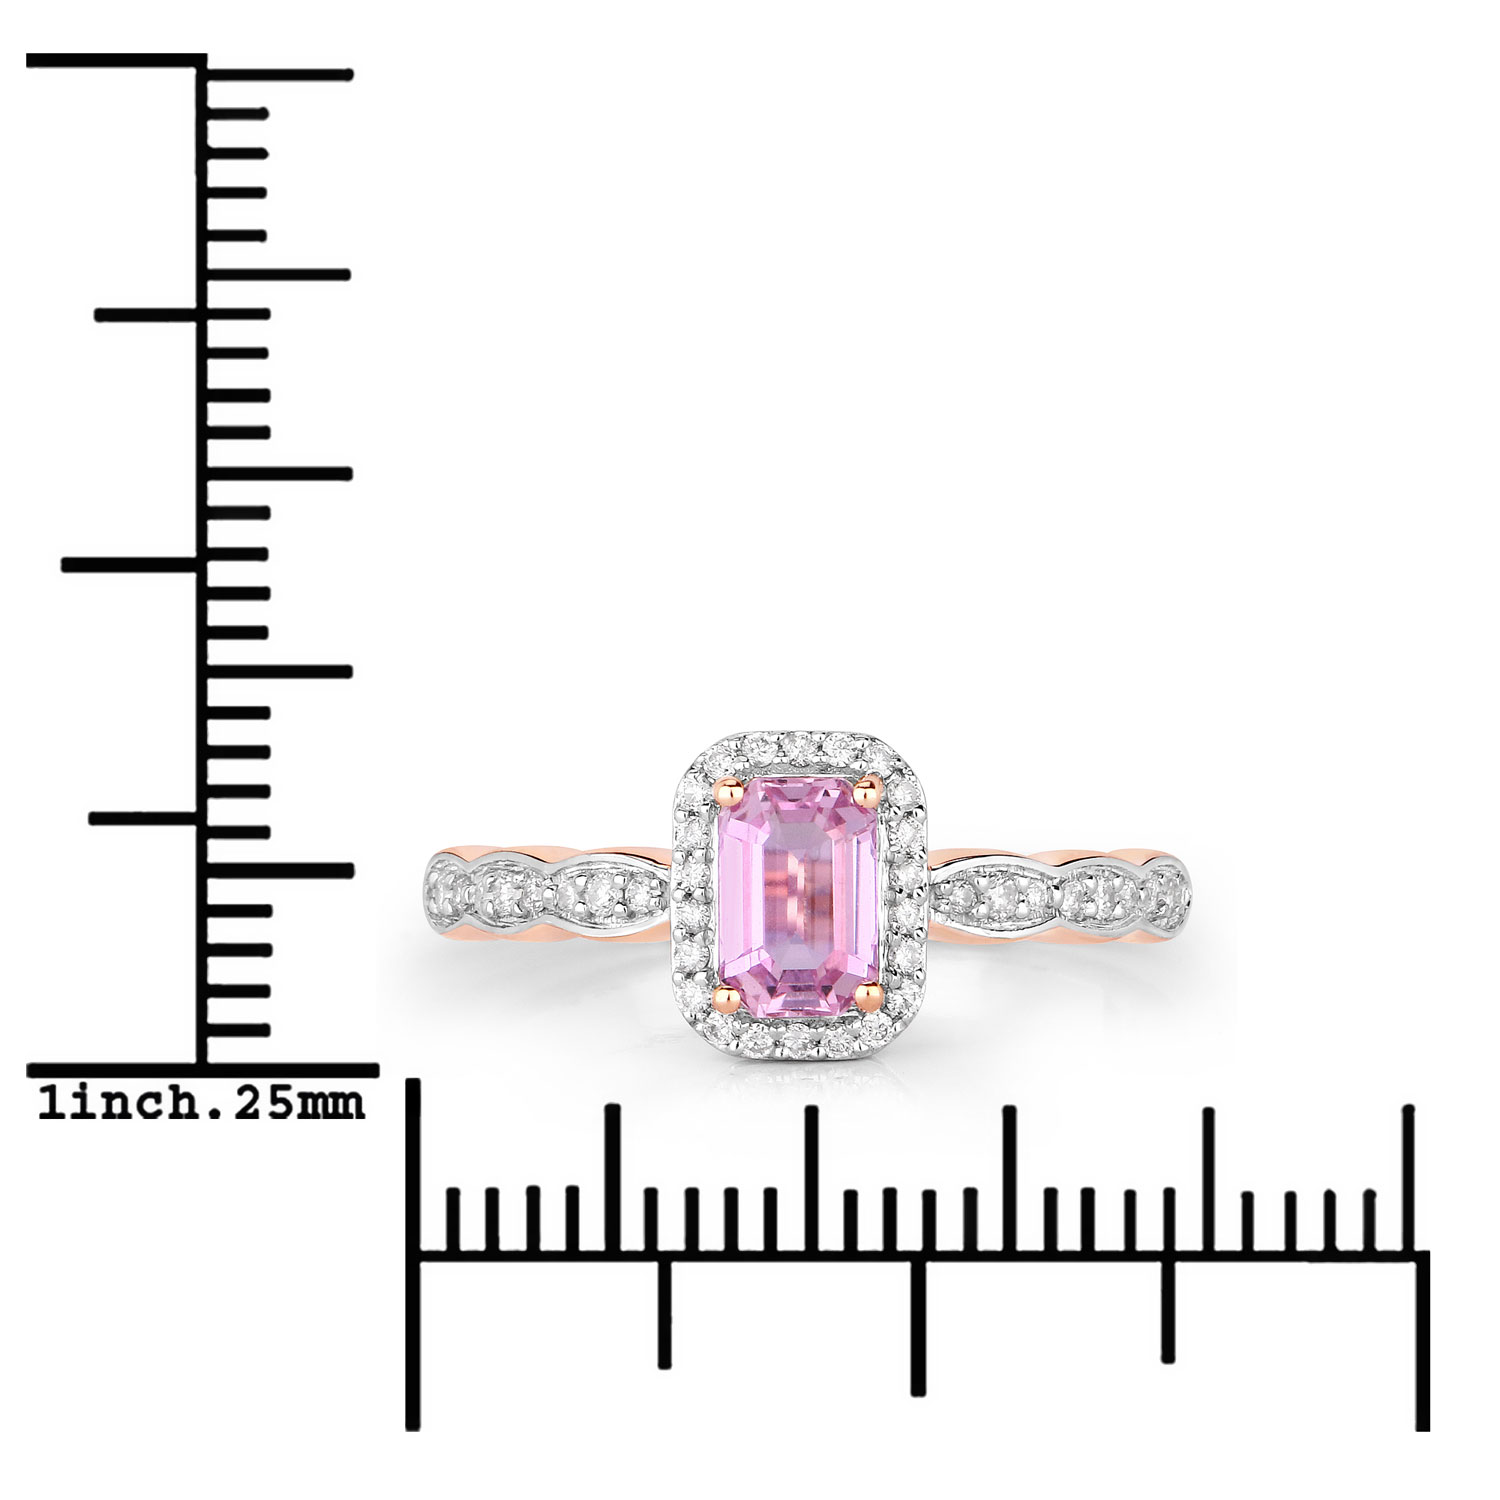 Classic French 14K Rose Gold 3.0 Carat Light Pink Sapphire Solitaire  Wedding Ring R401-14KRGLPS